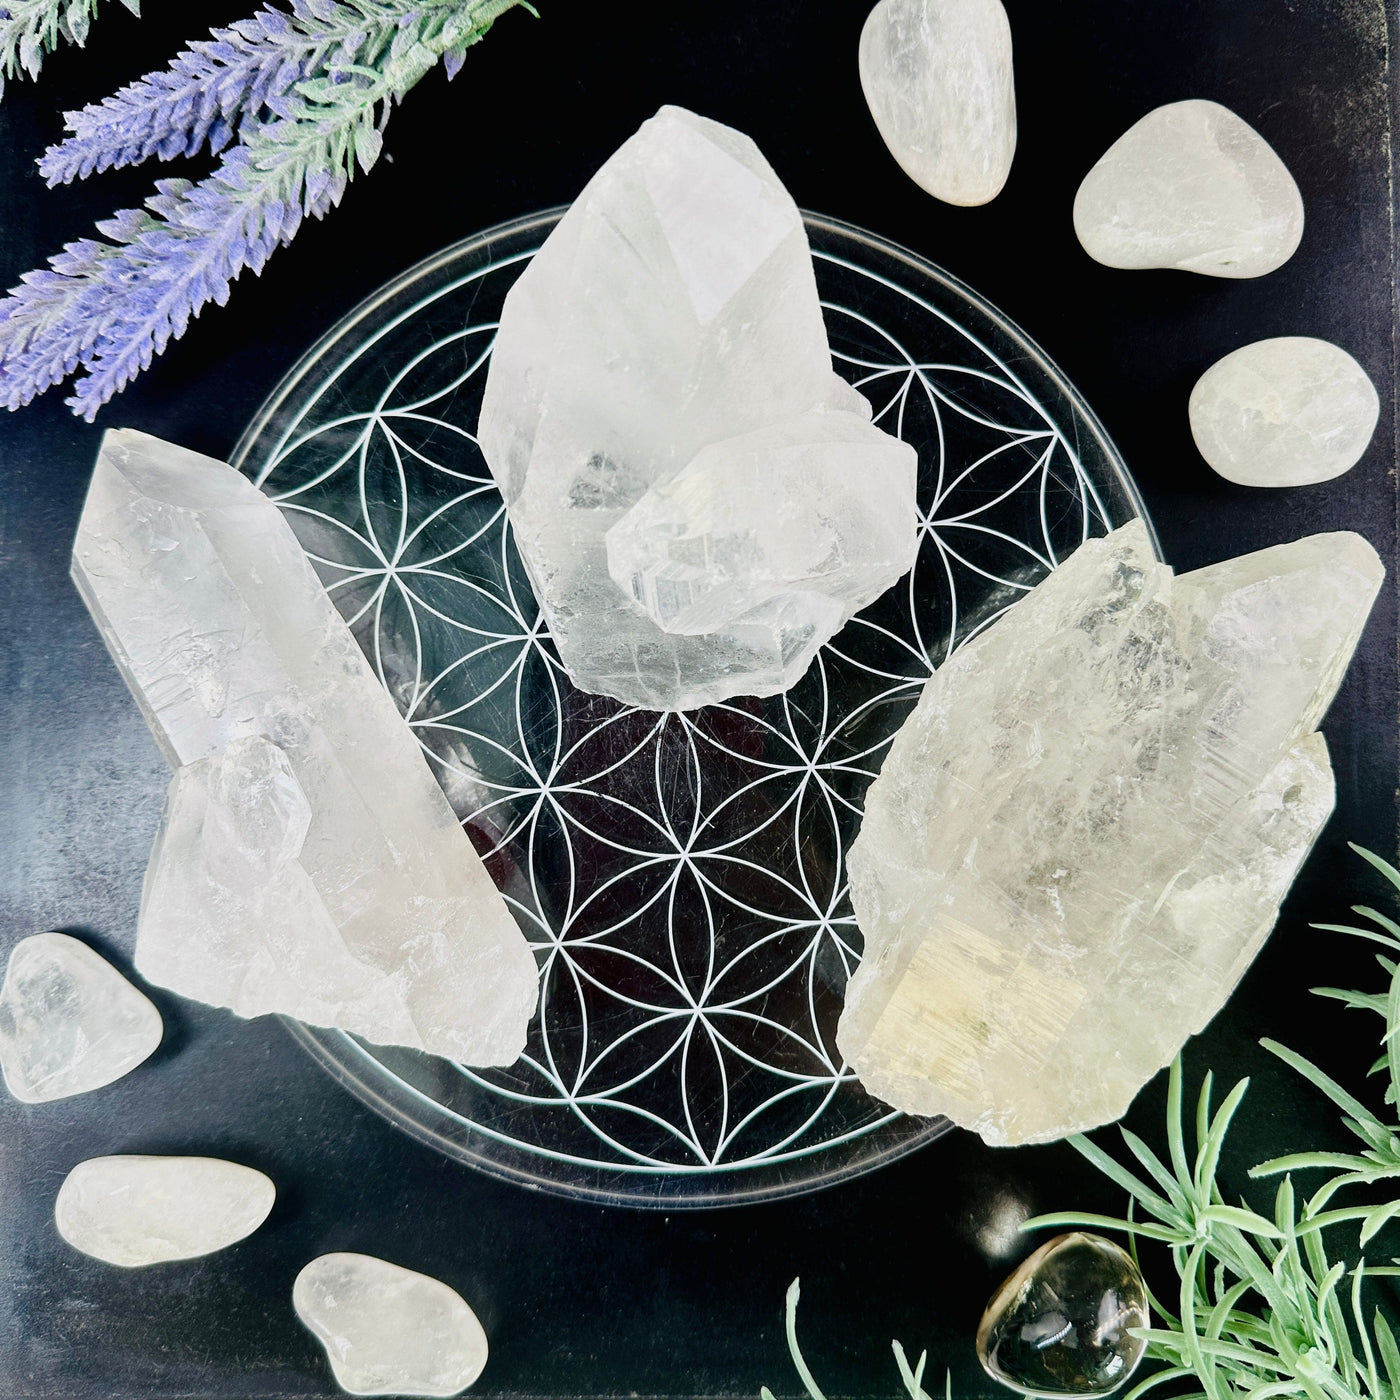  Crystal Quartz Cluster - Large Points - You Choose all three points